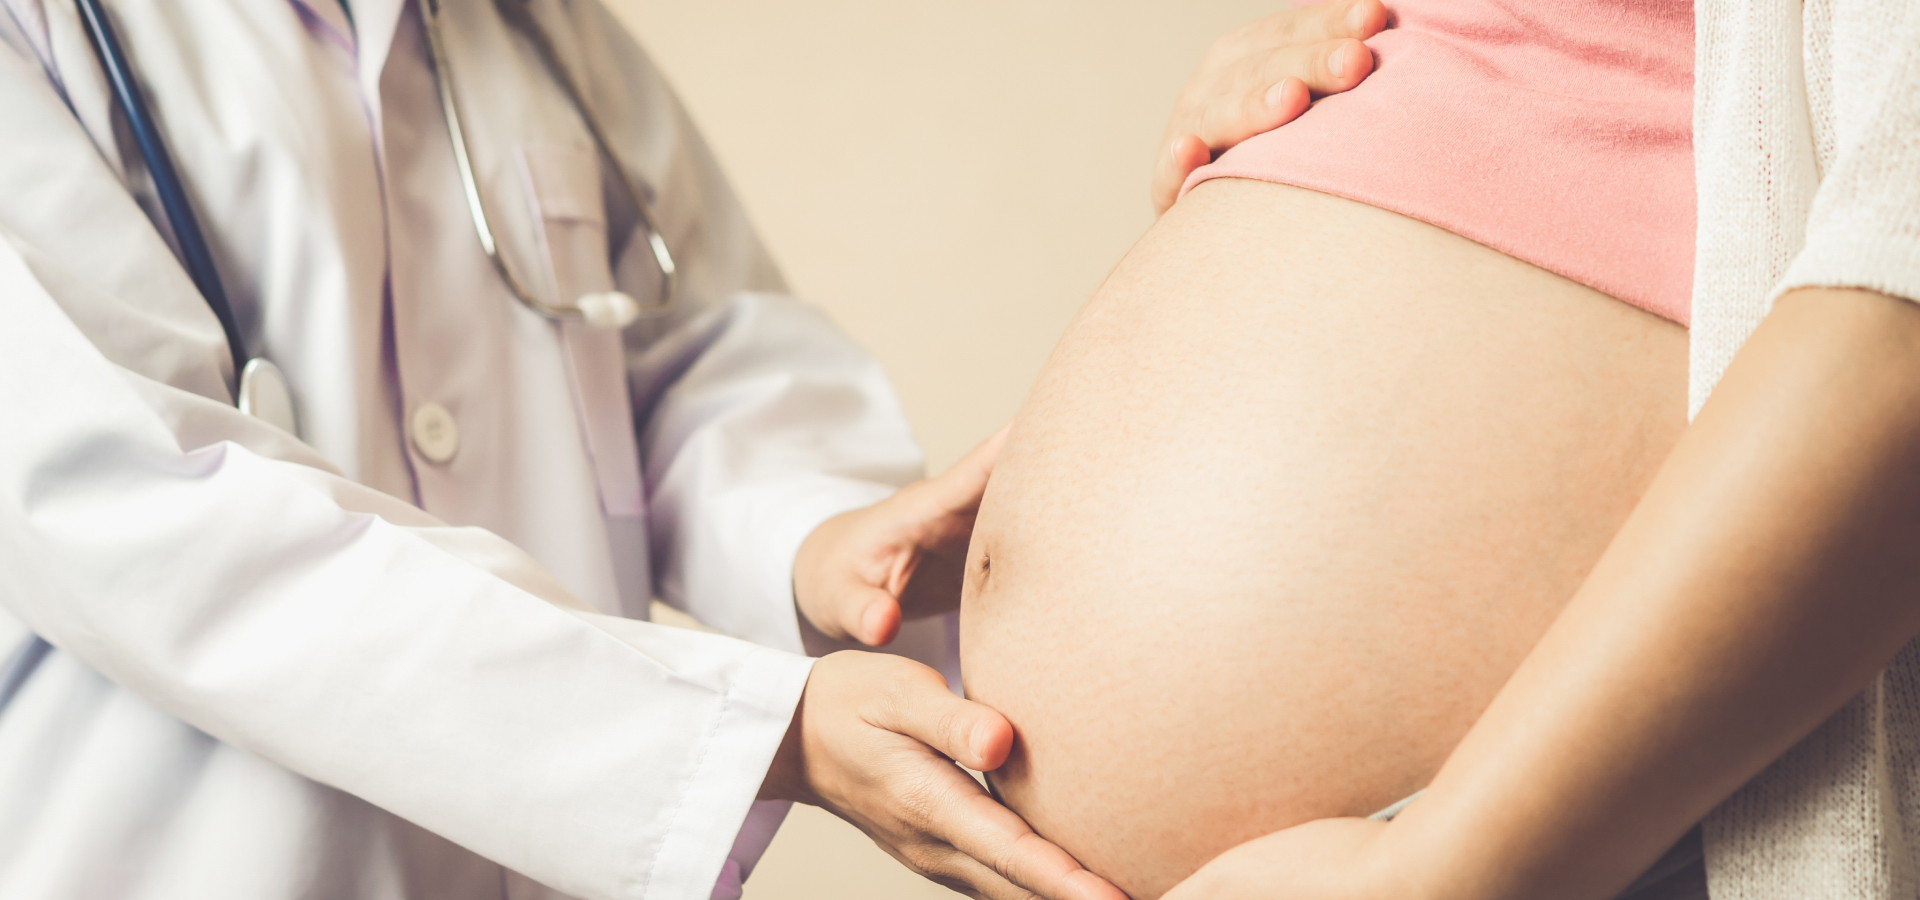 Doctor placing her hands on a pregnant woman's belly